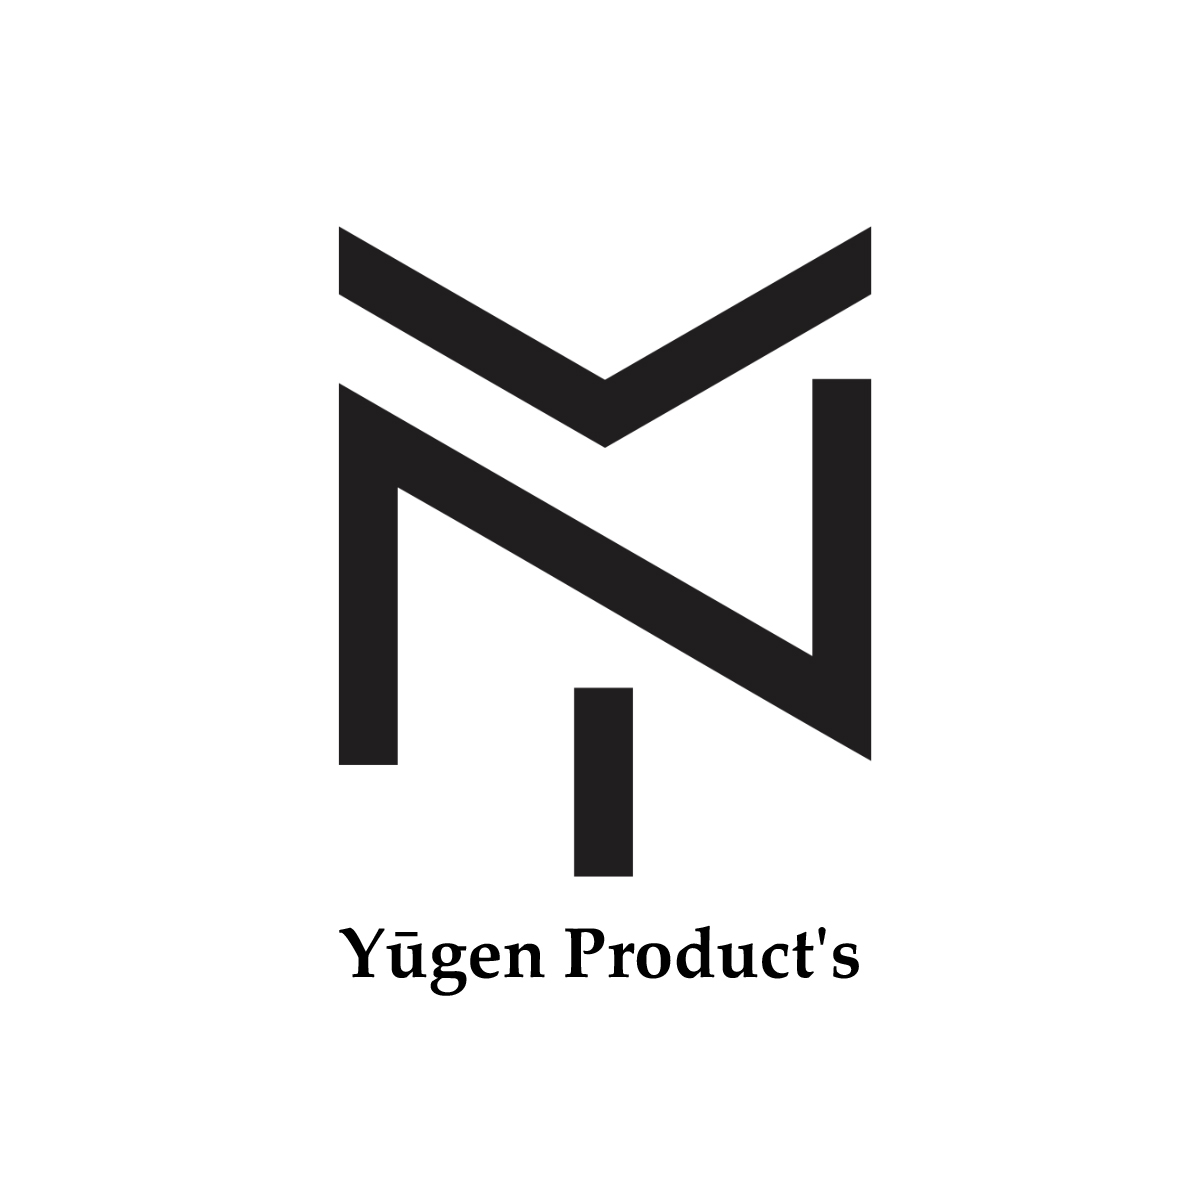 Yugen Products